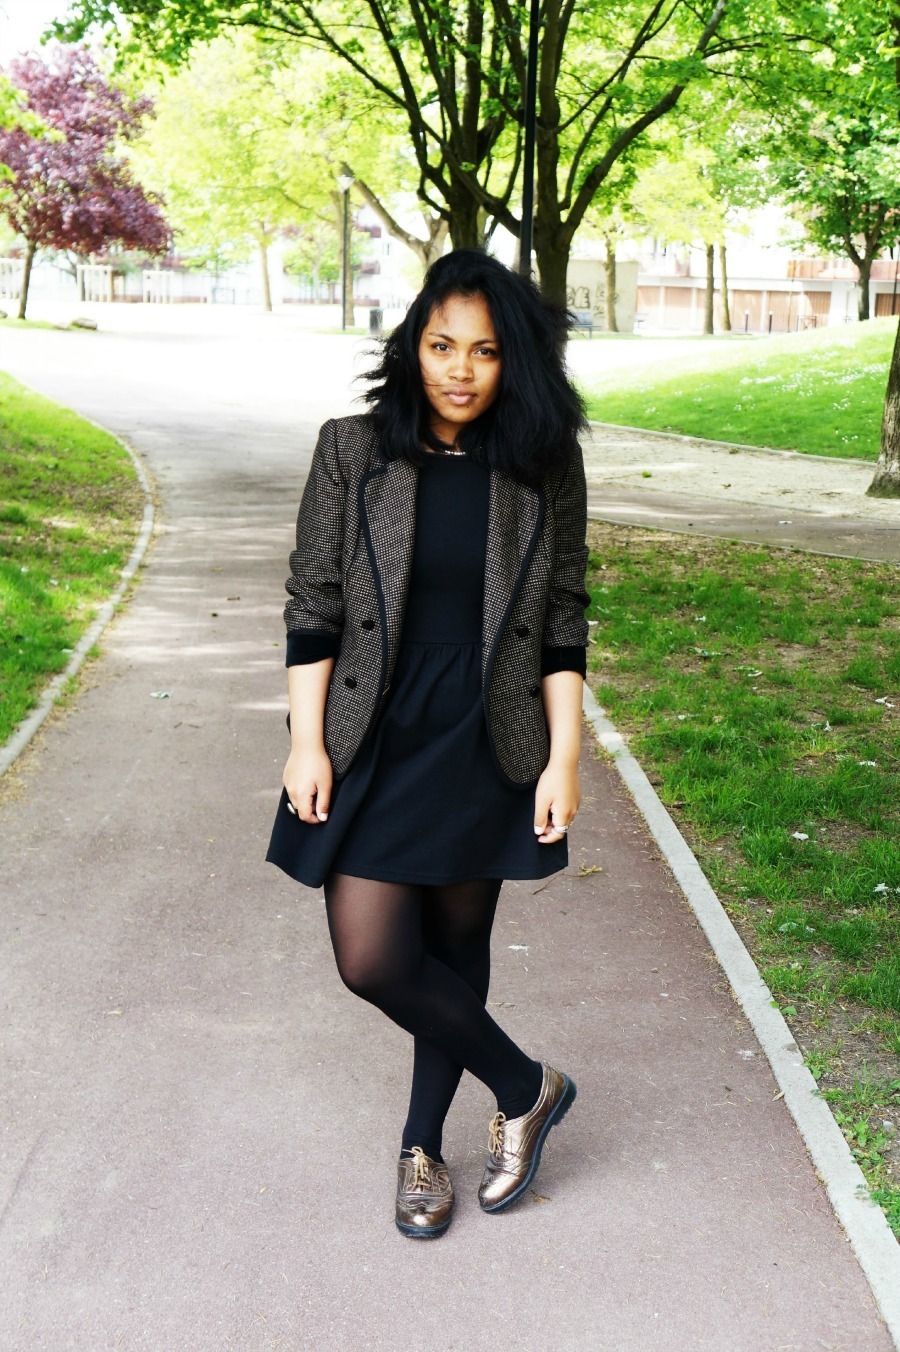 Women's Charcoal Tweed Jacket, Black Skater Dress, Gold Leather Oxford  Shoes, Black Tights